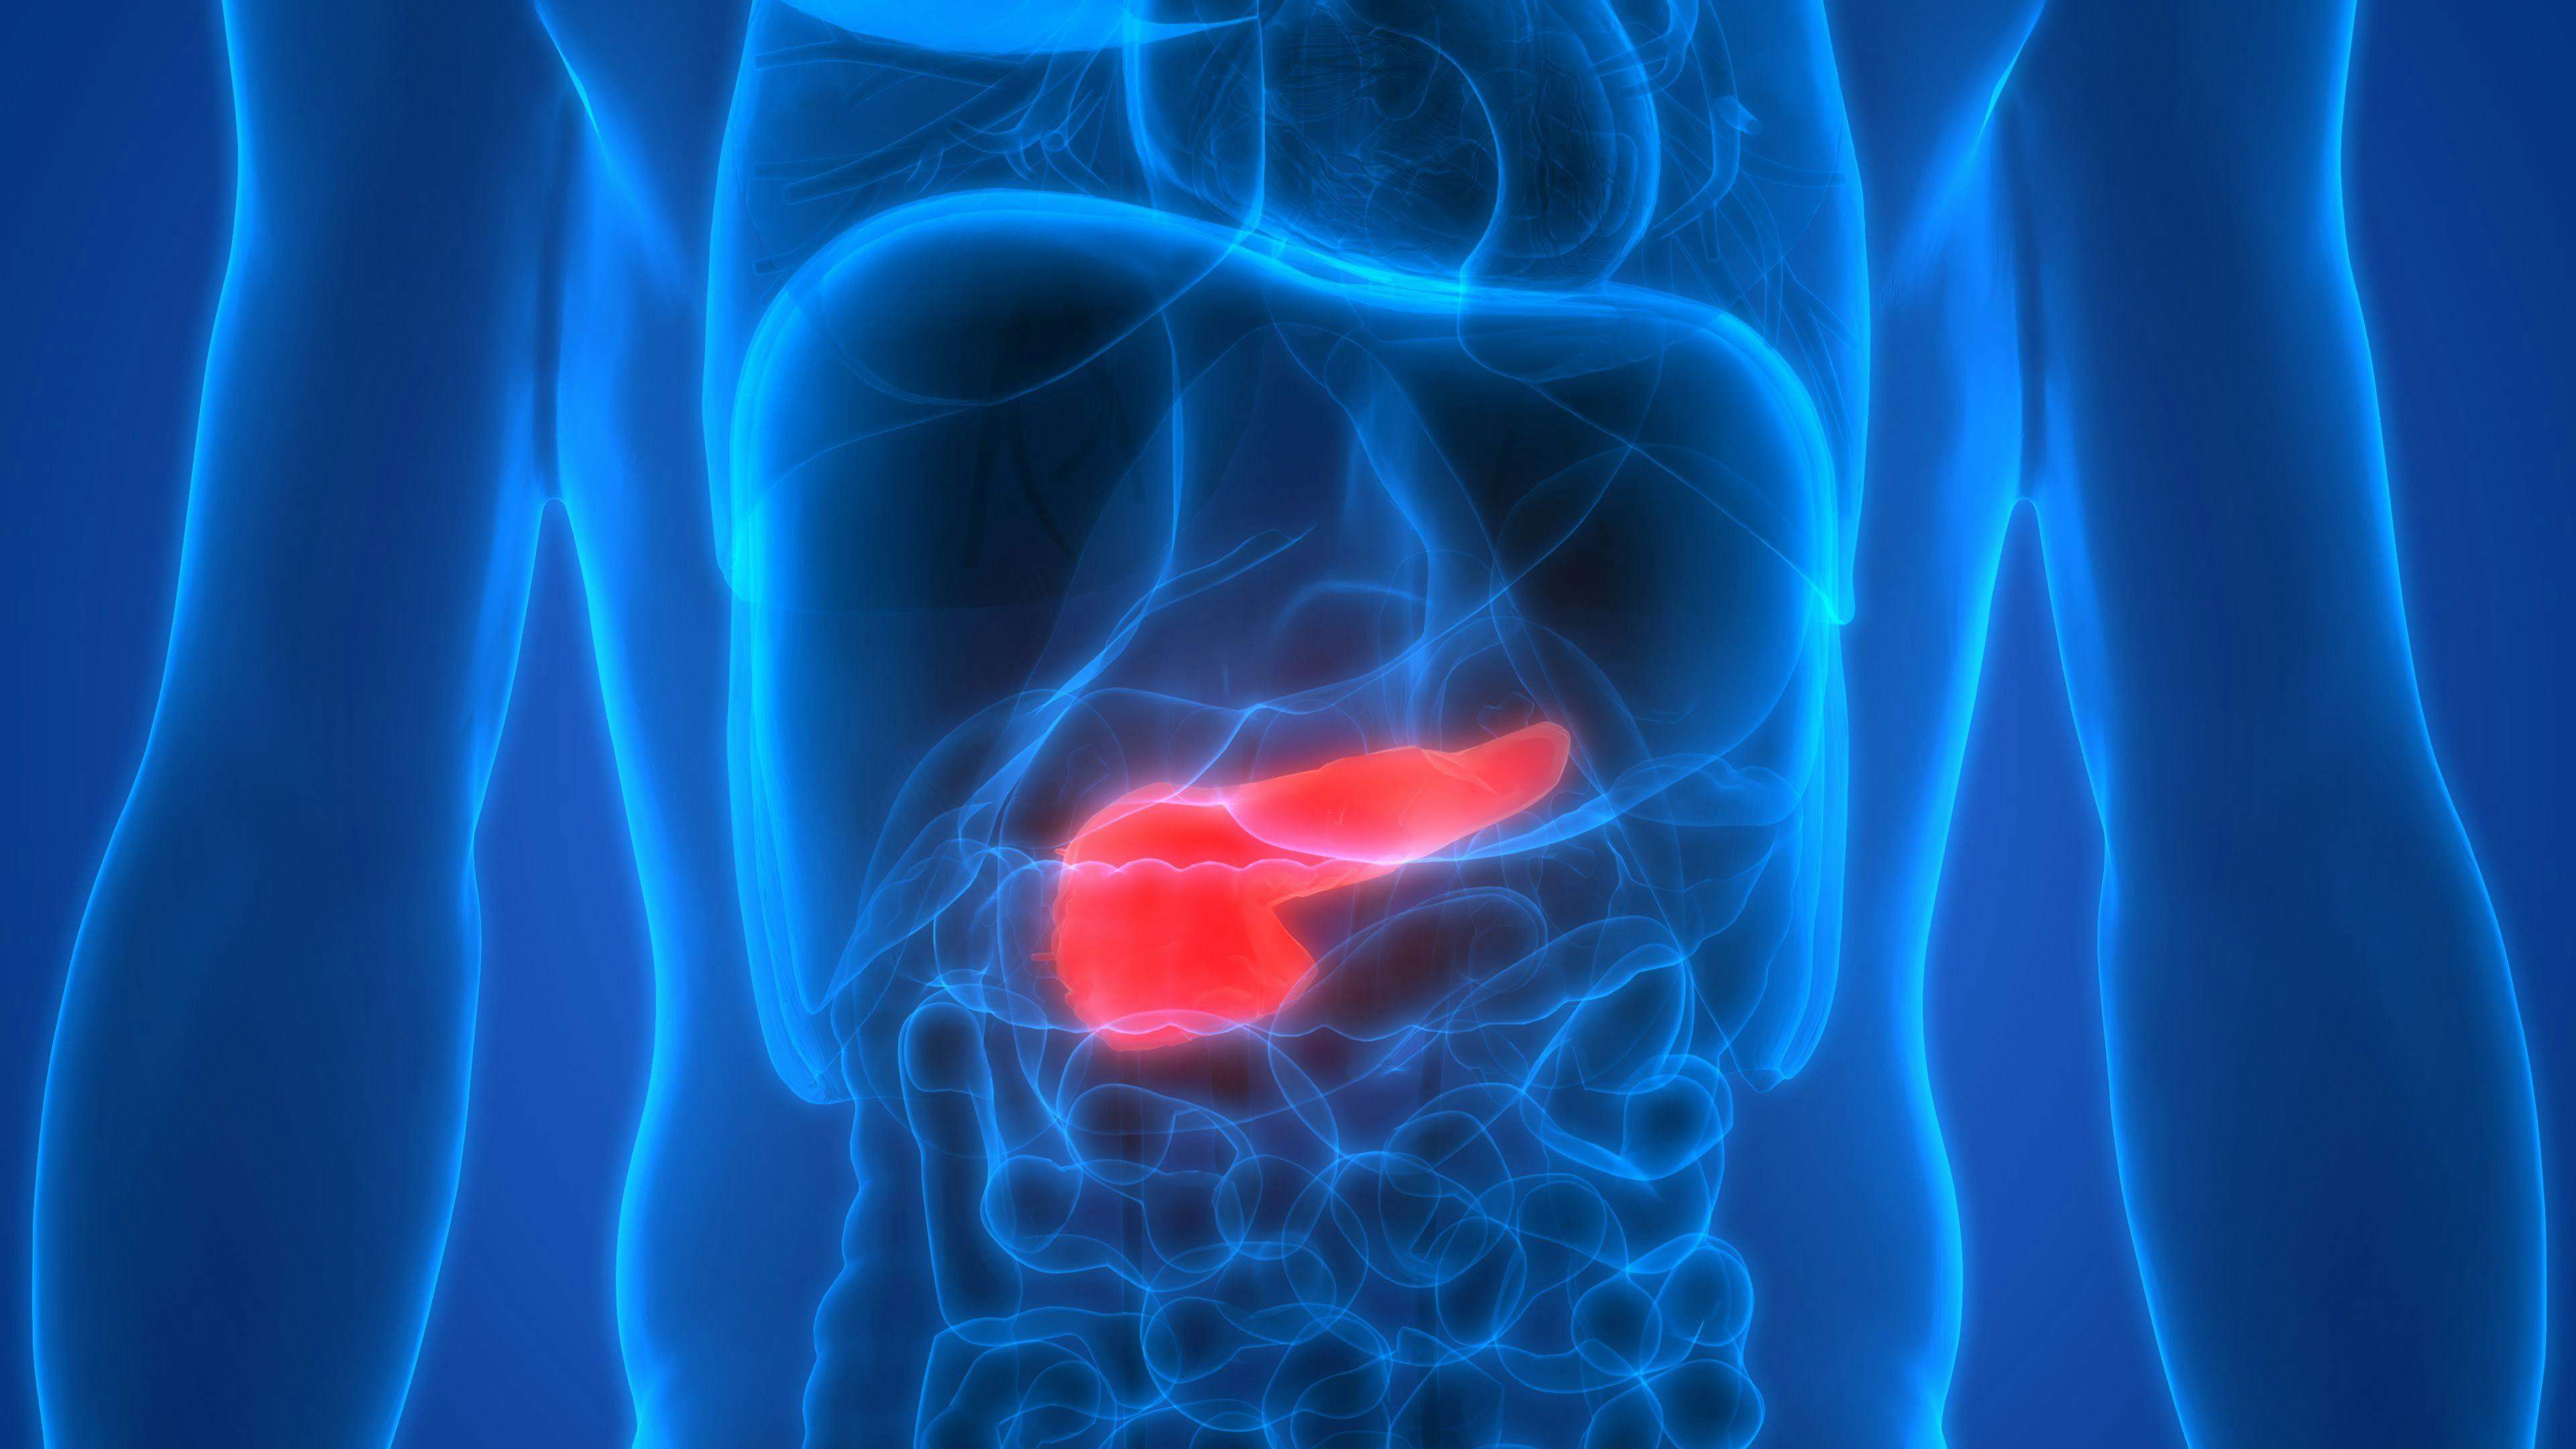 Diane Simeone, MD, spoke to the need to determine which patients are at risk of developing pancreatic cancer, the importance of early detection, and challenges that need to be addressed in order to improve survival.